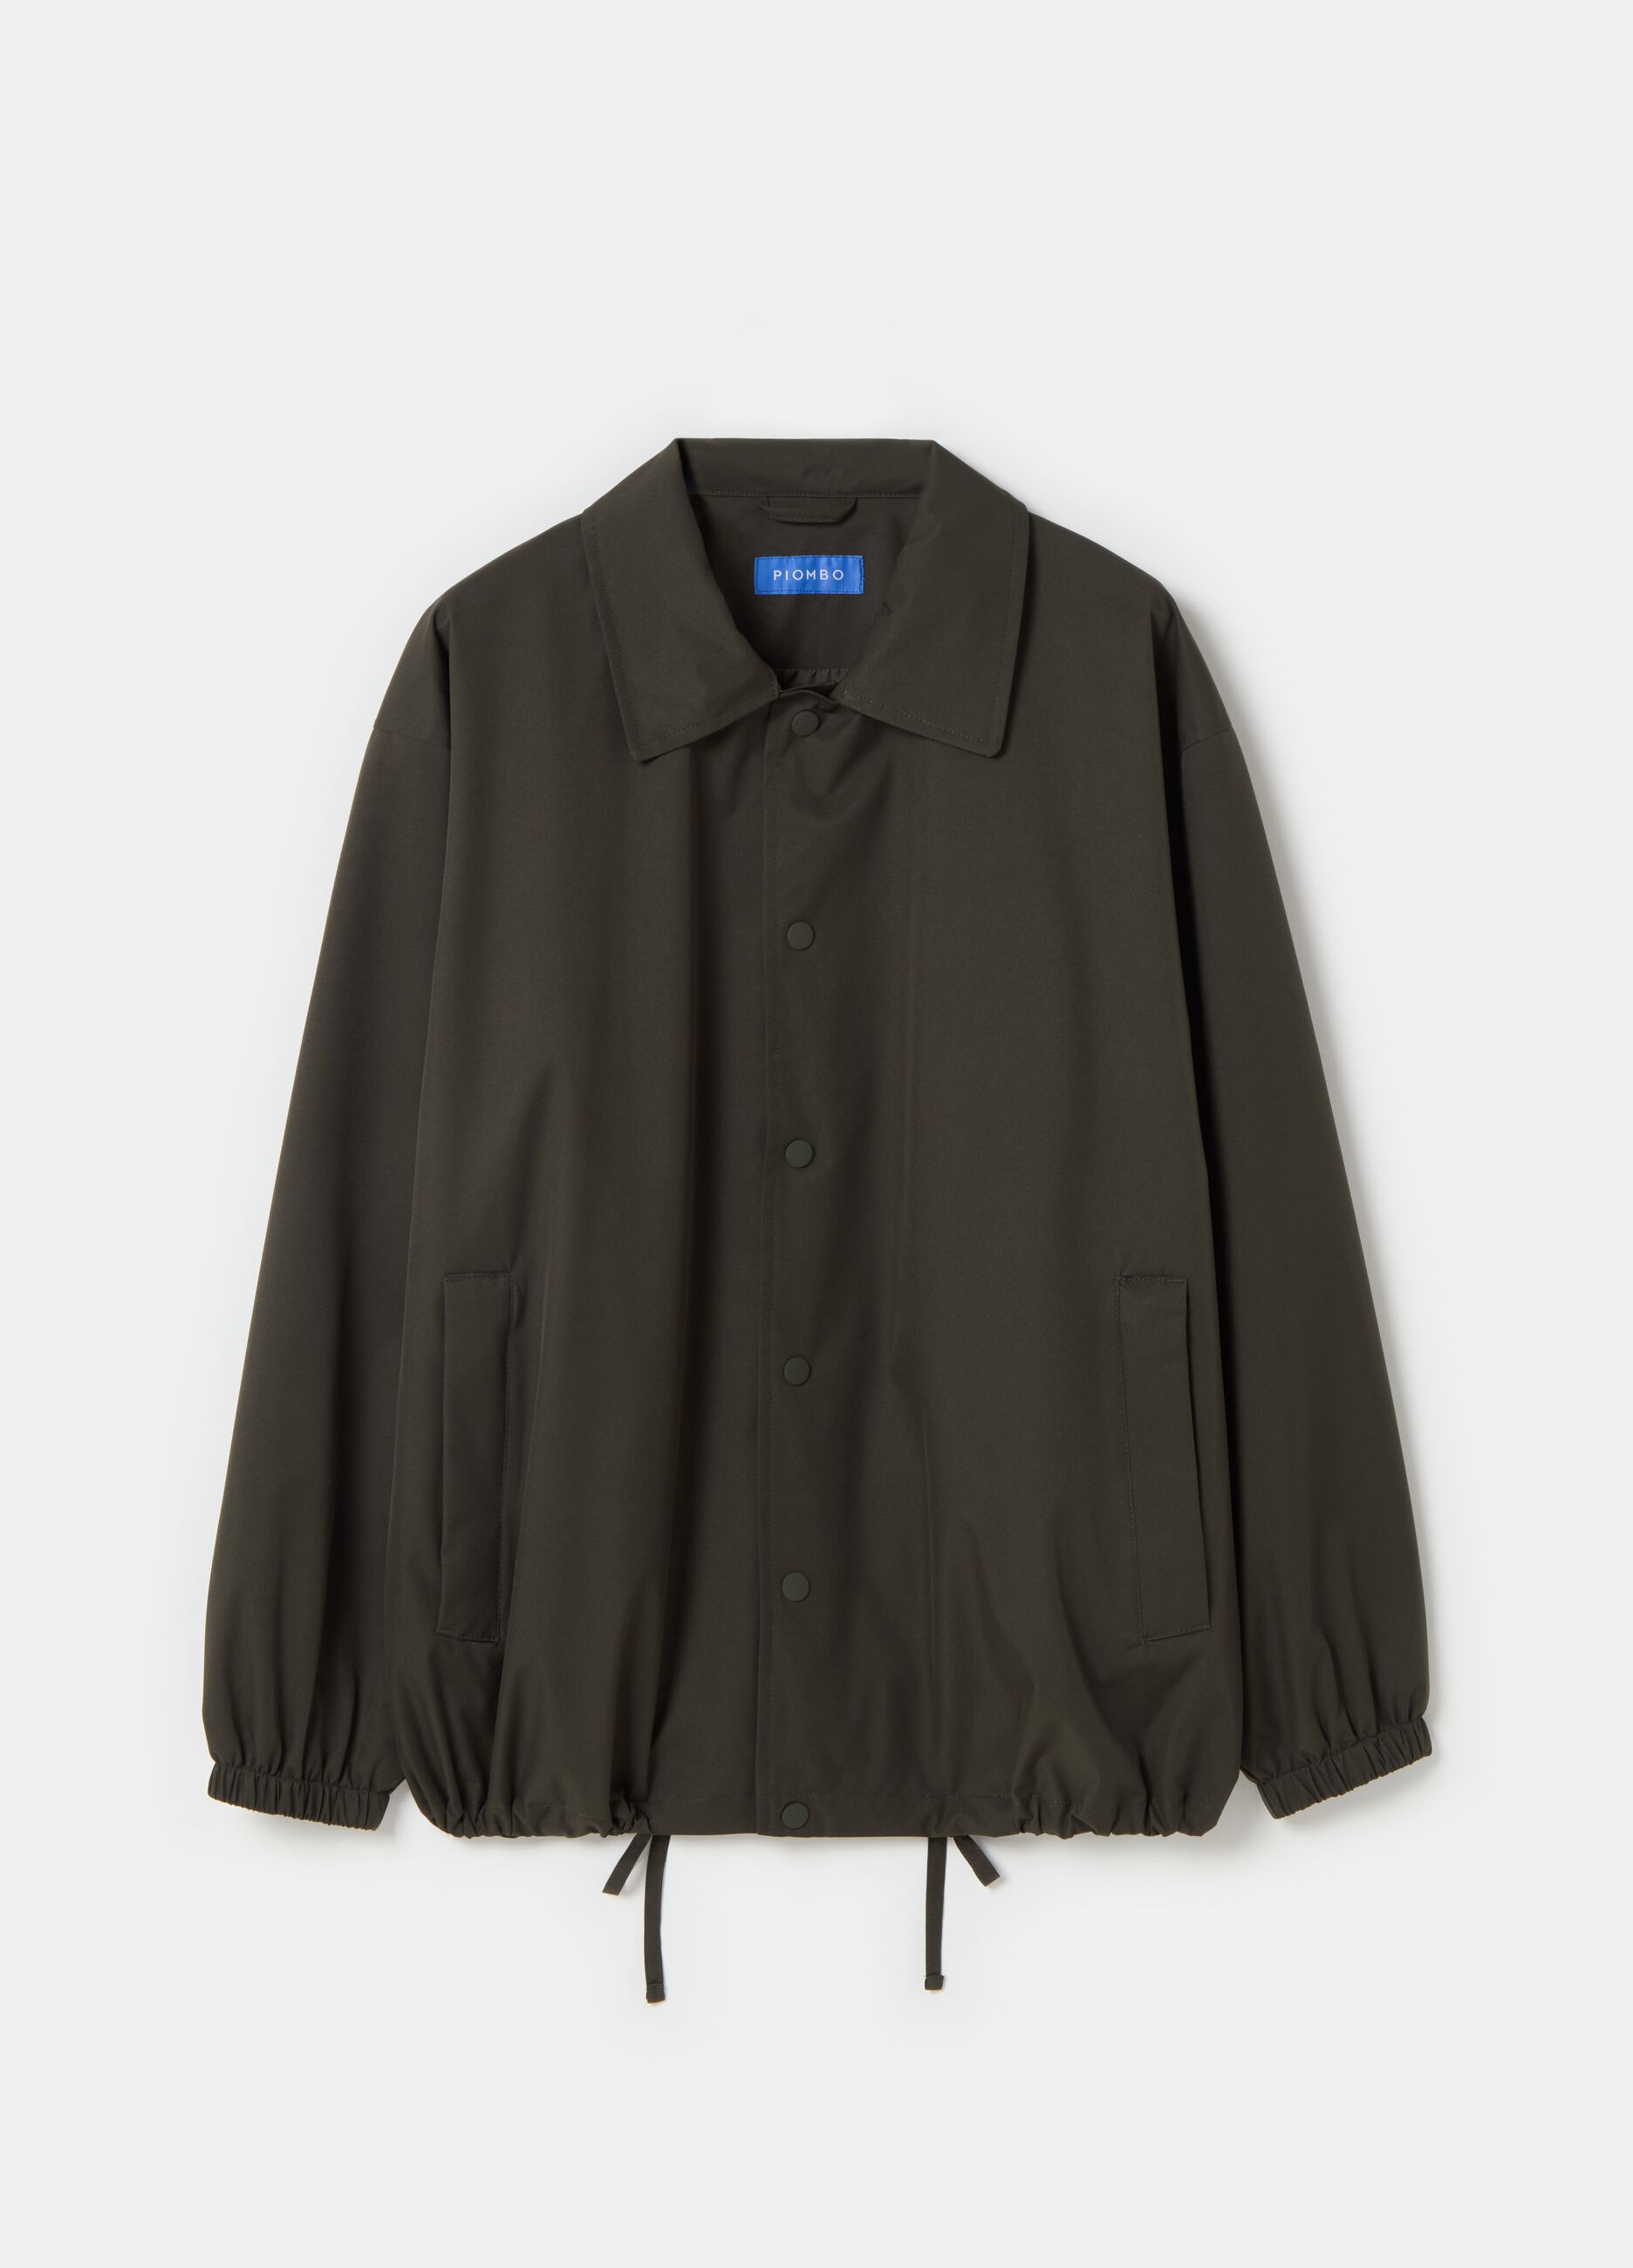 Selection jacket in technical fabric with drawstring